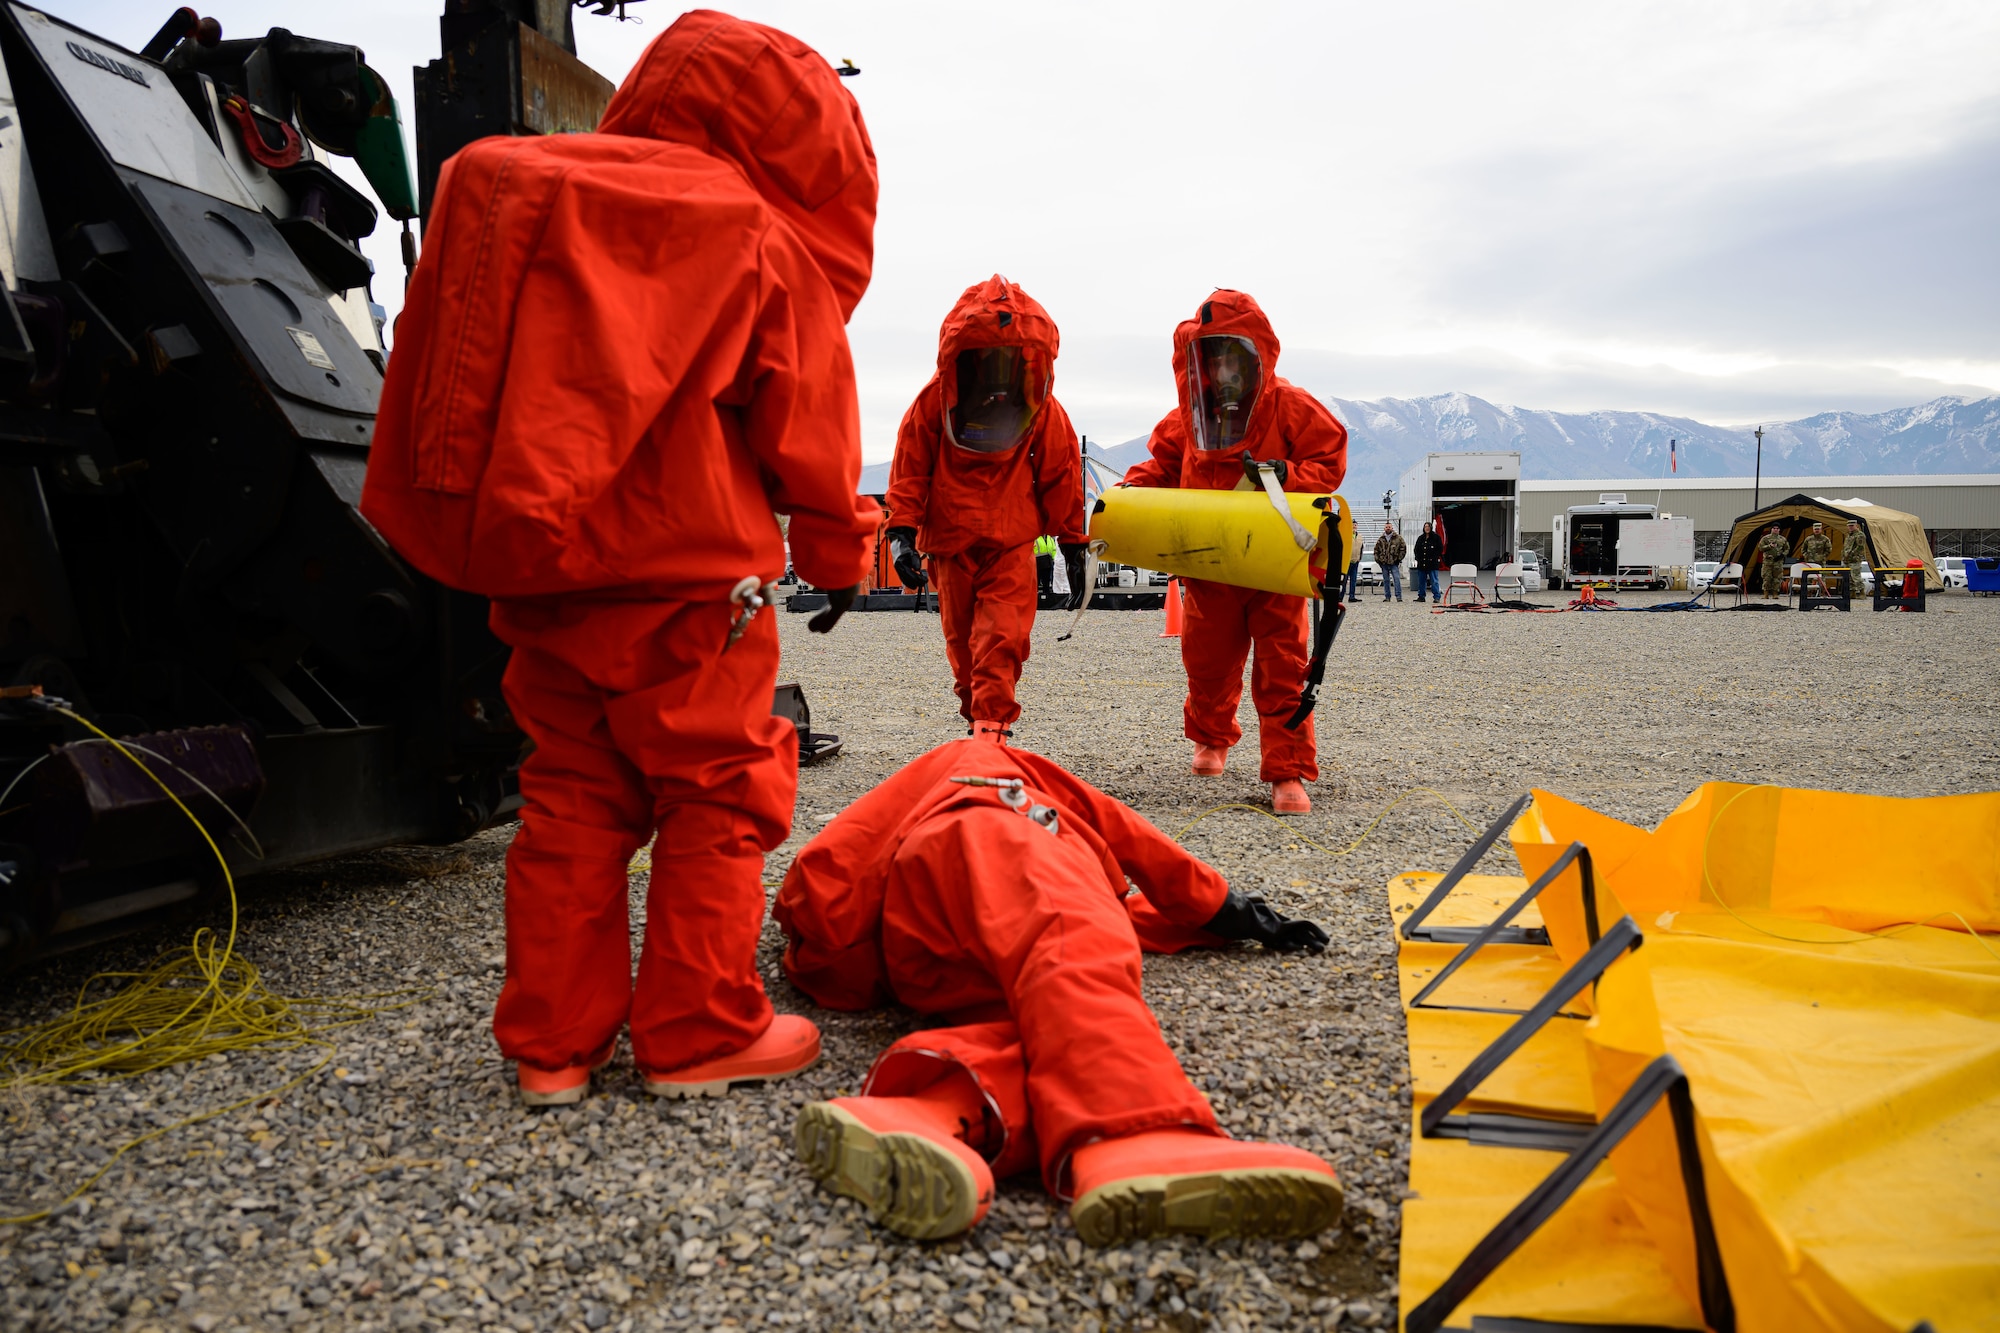 Members of the Missile Mishap Recovery Team respond to a simulated casualty during an exercise simulating a transportation accident involving a missile component containing hazardous material at the Box Elder County Fairgrounds, Tremonton, Utah, Nov. 2, 2023. The MMRT is on call 24/7, 365 days a year to respond to any number of situations involving an intercontinental ballistic missile where technical procedures do not exist to address the mishap or the loss of life is possible. (U.S. Air Force photo by R. Nial Bradshaw)